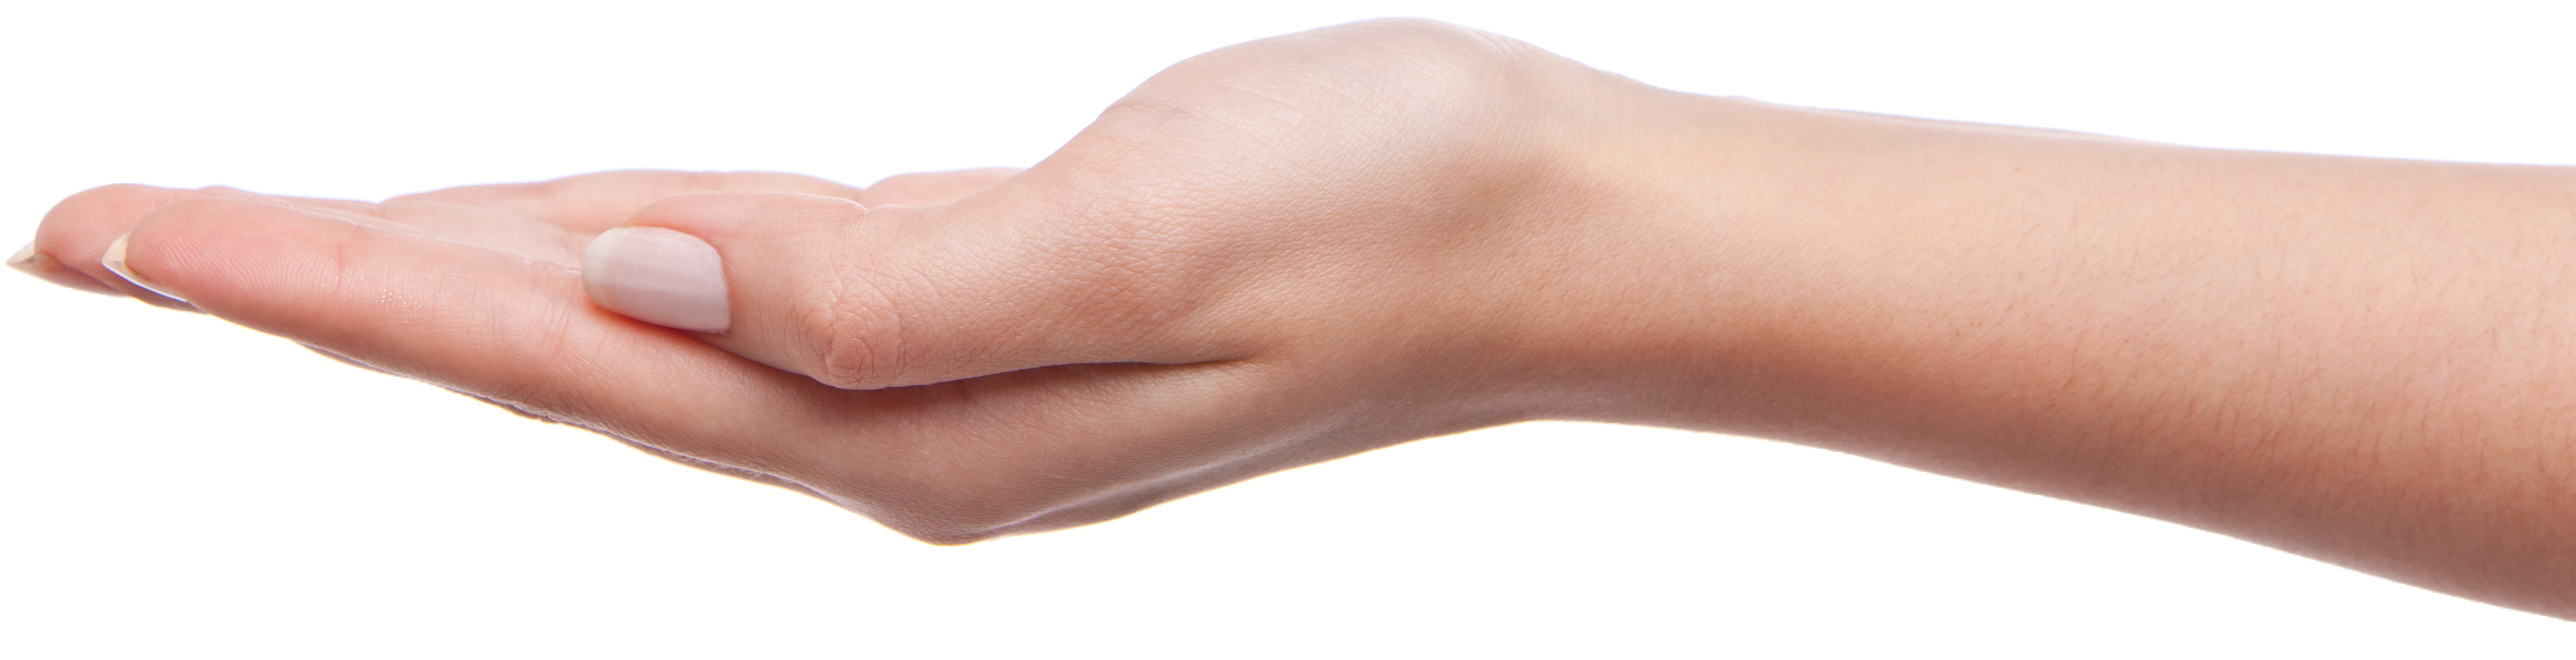 Palm hands PNG, hand image free